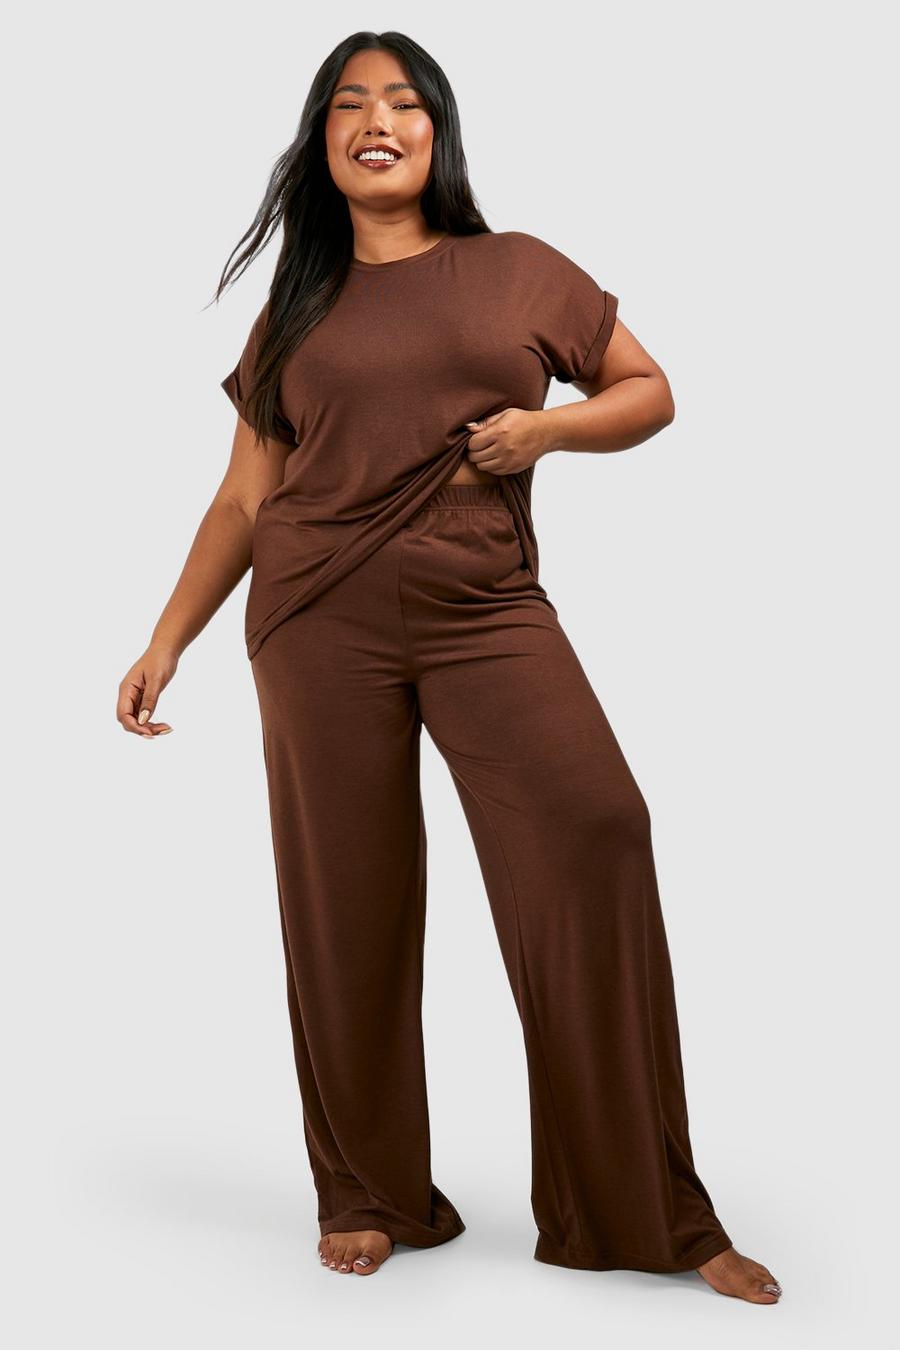  Plus Size Jumpers For Women Casual Loose Wide Leg